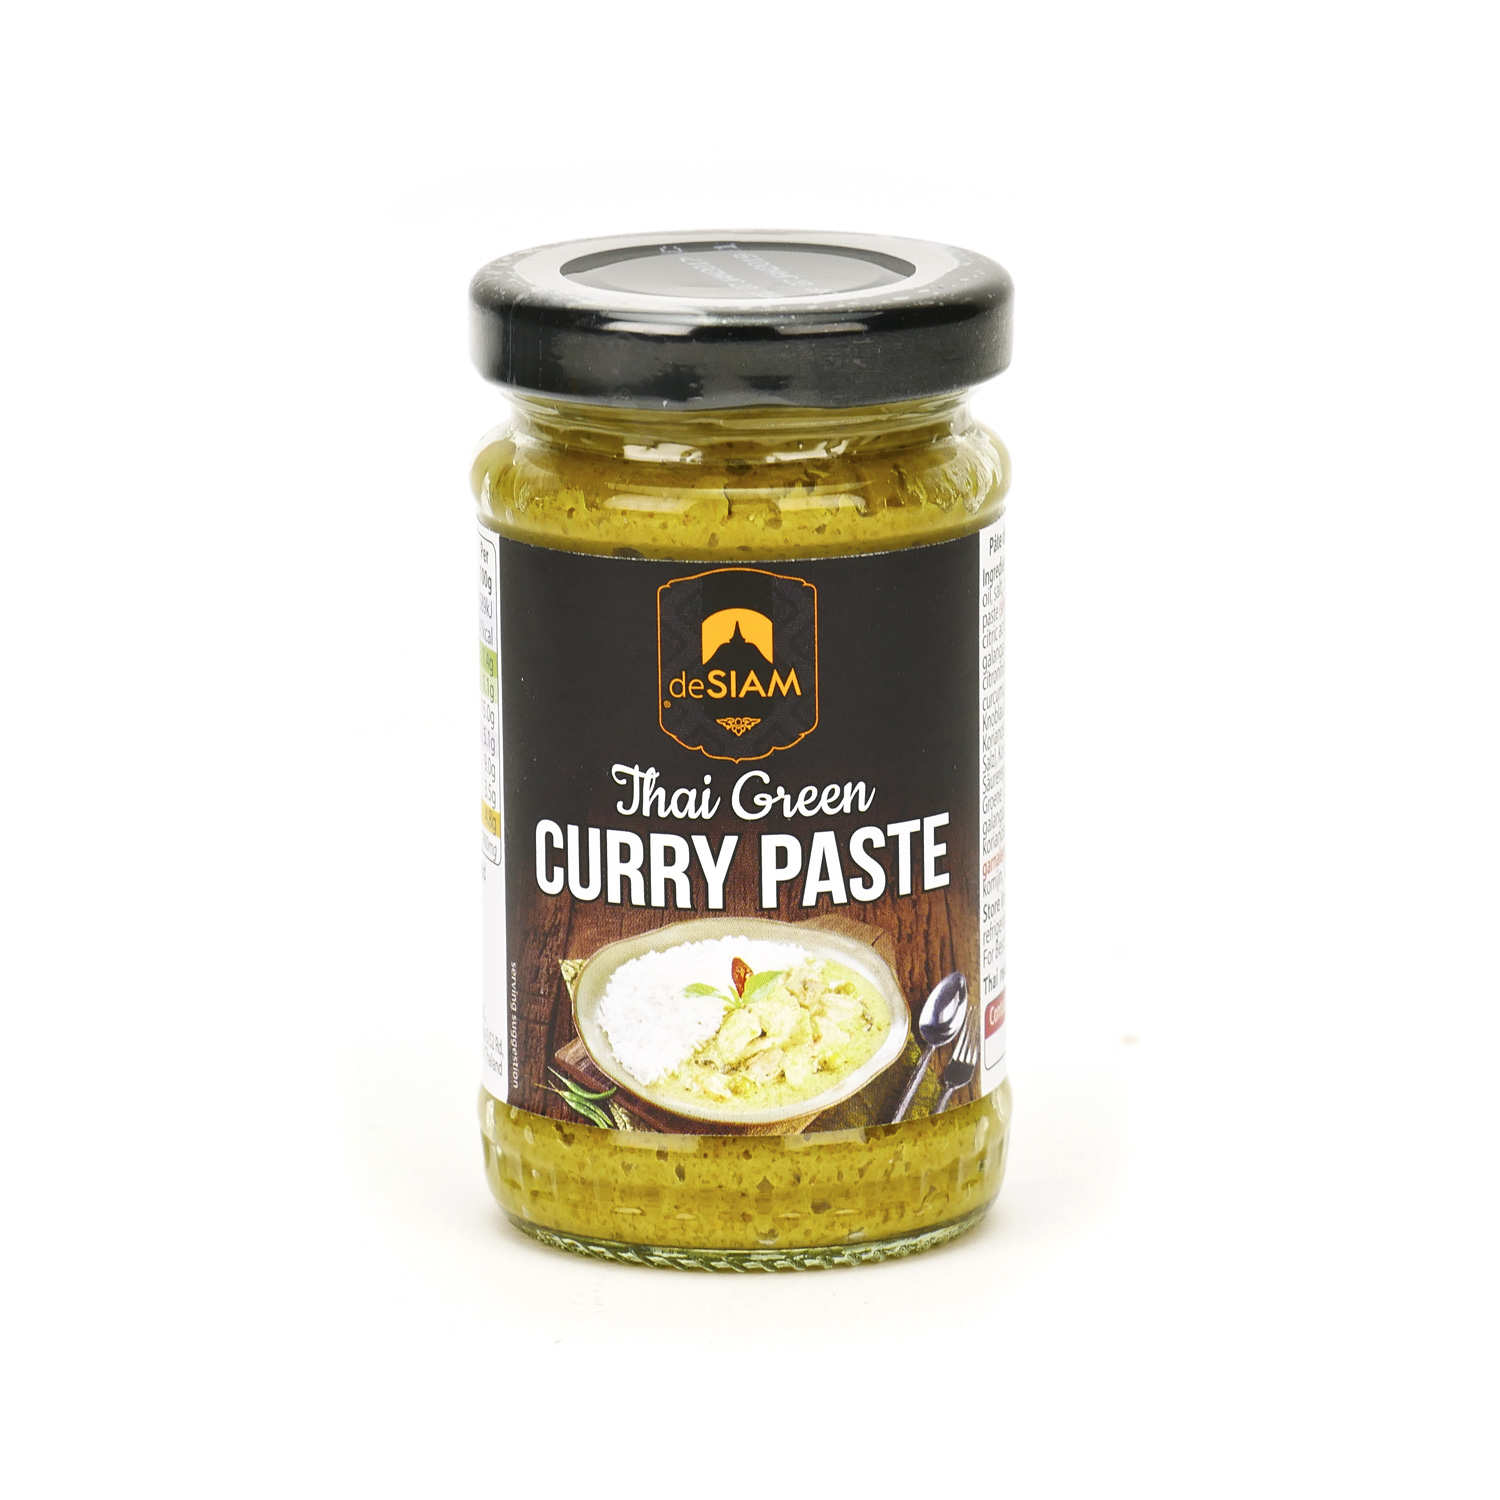 Siam Green Thai Curry paste. De Siam Green Thai Curry paste. Without past